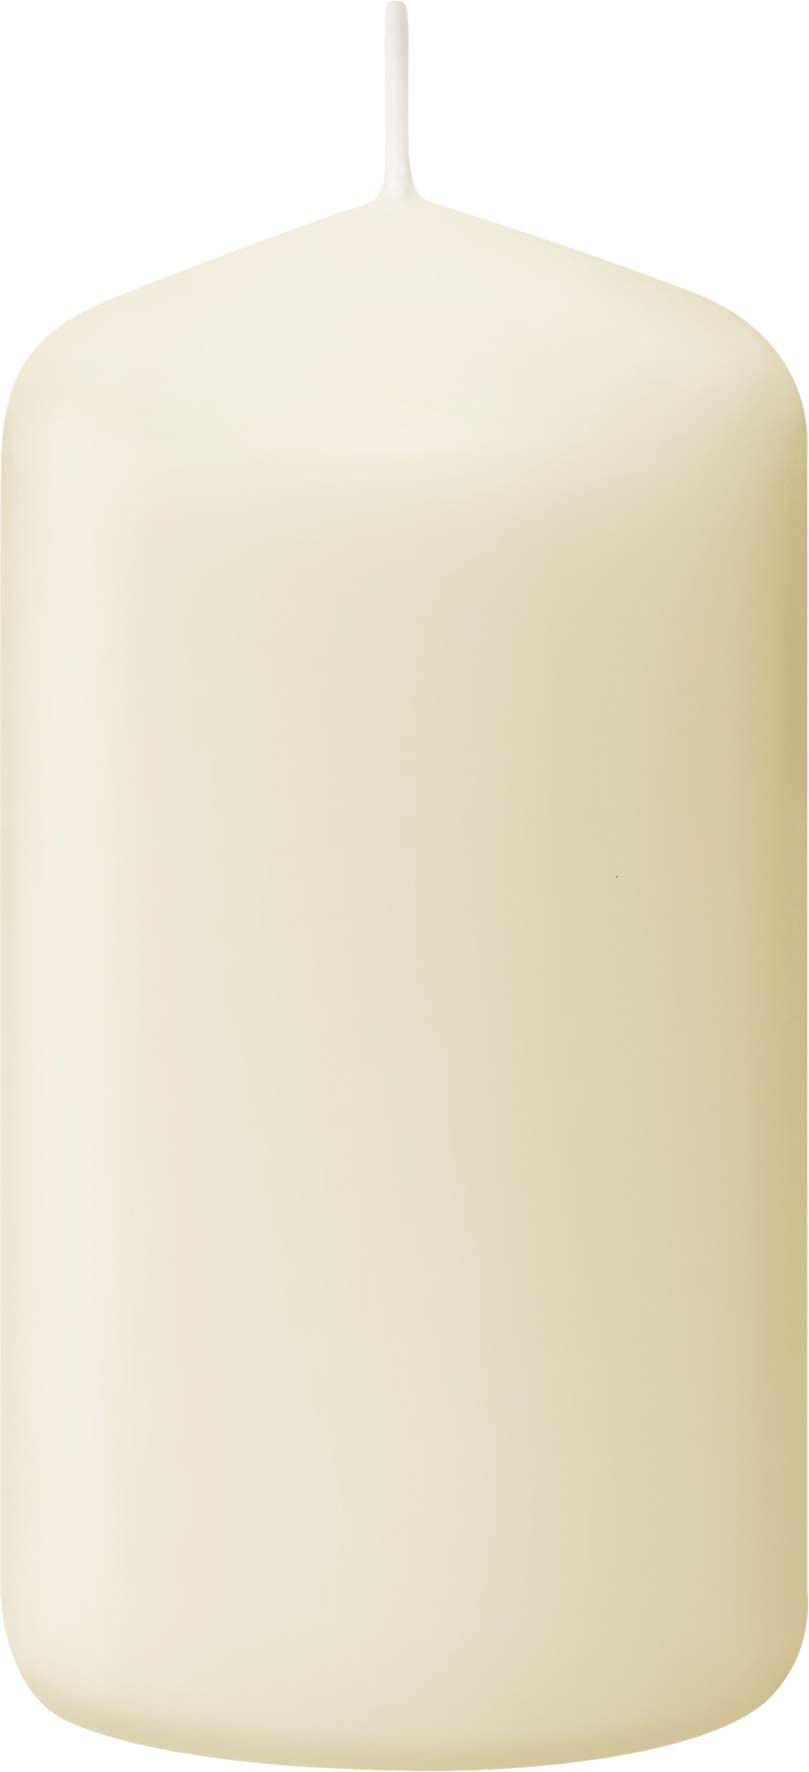 BOLSIUS Set of 20 Ivory Pillar Candles - Unscented Candle Set - Dripless Clean Burning Smokeless Dinner Candle - Perfect for Wedding Candles, Parties and Special Occasions  - Very Good